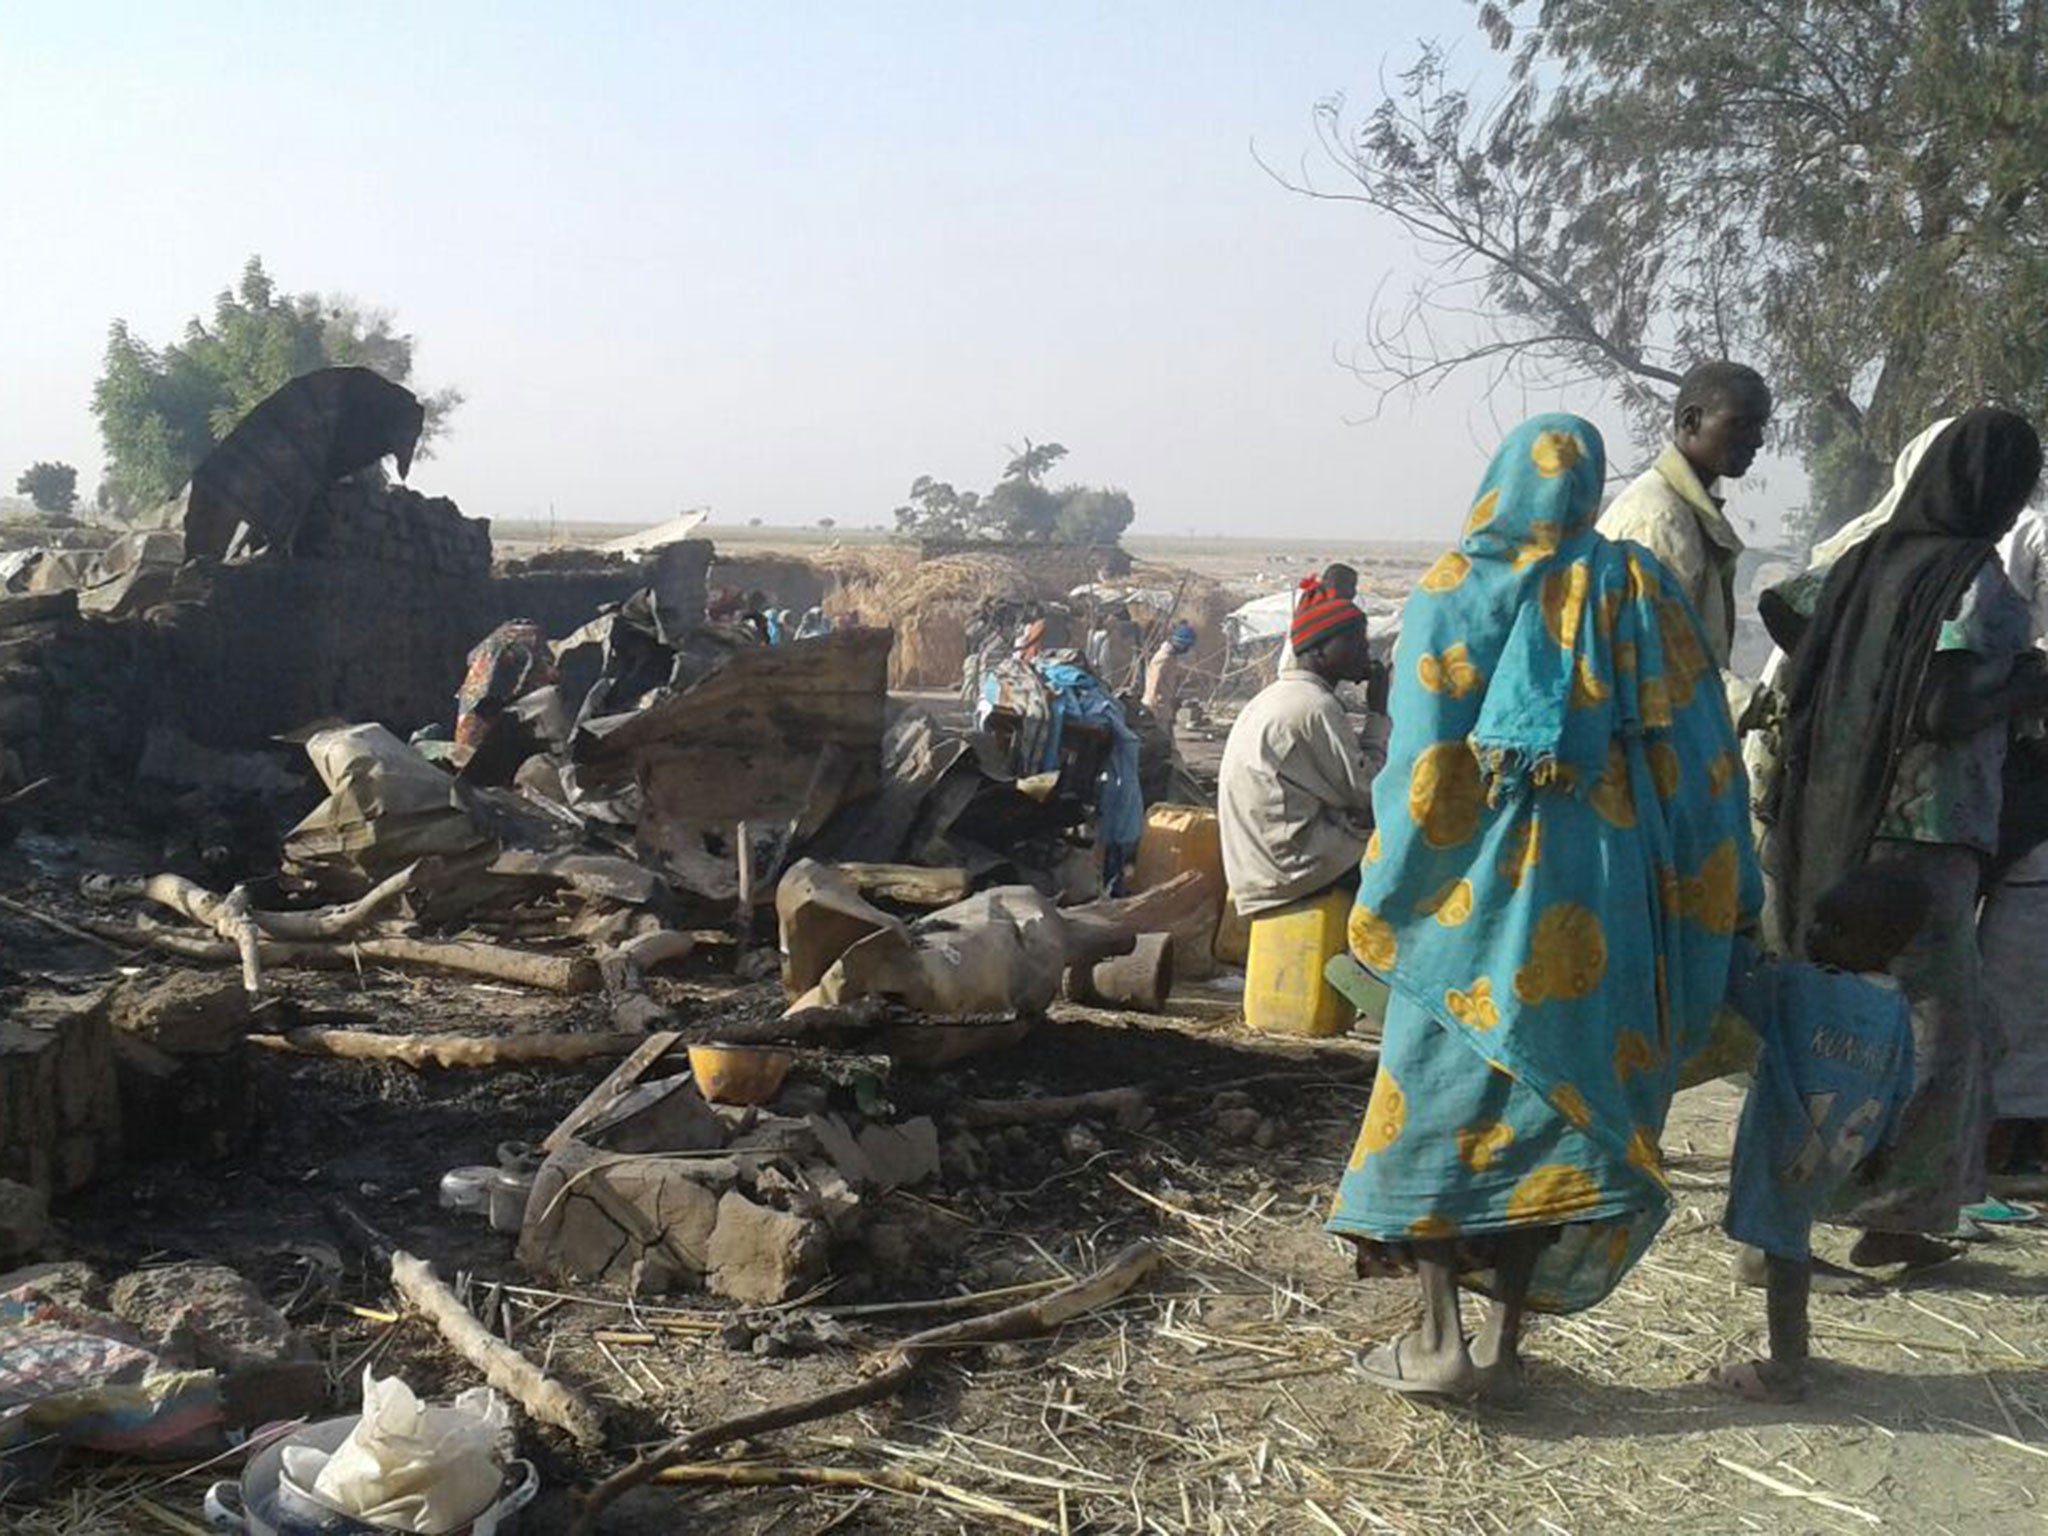 MSF released images showing the extent of the damage to the Rann camp